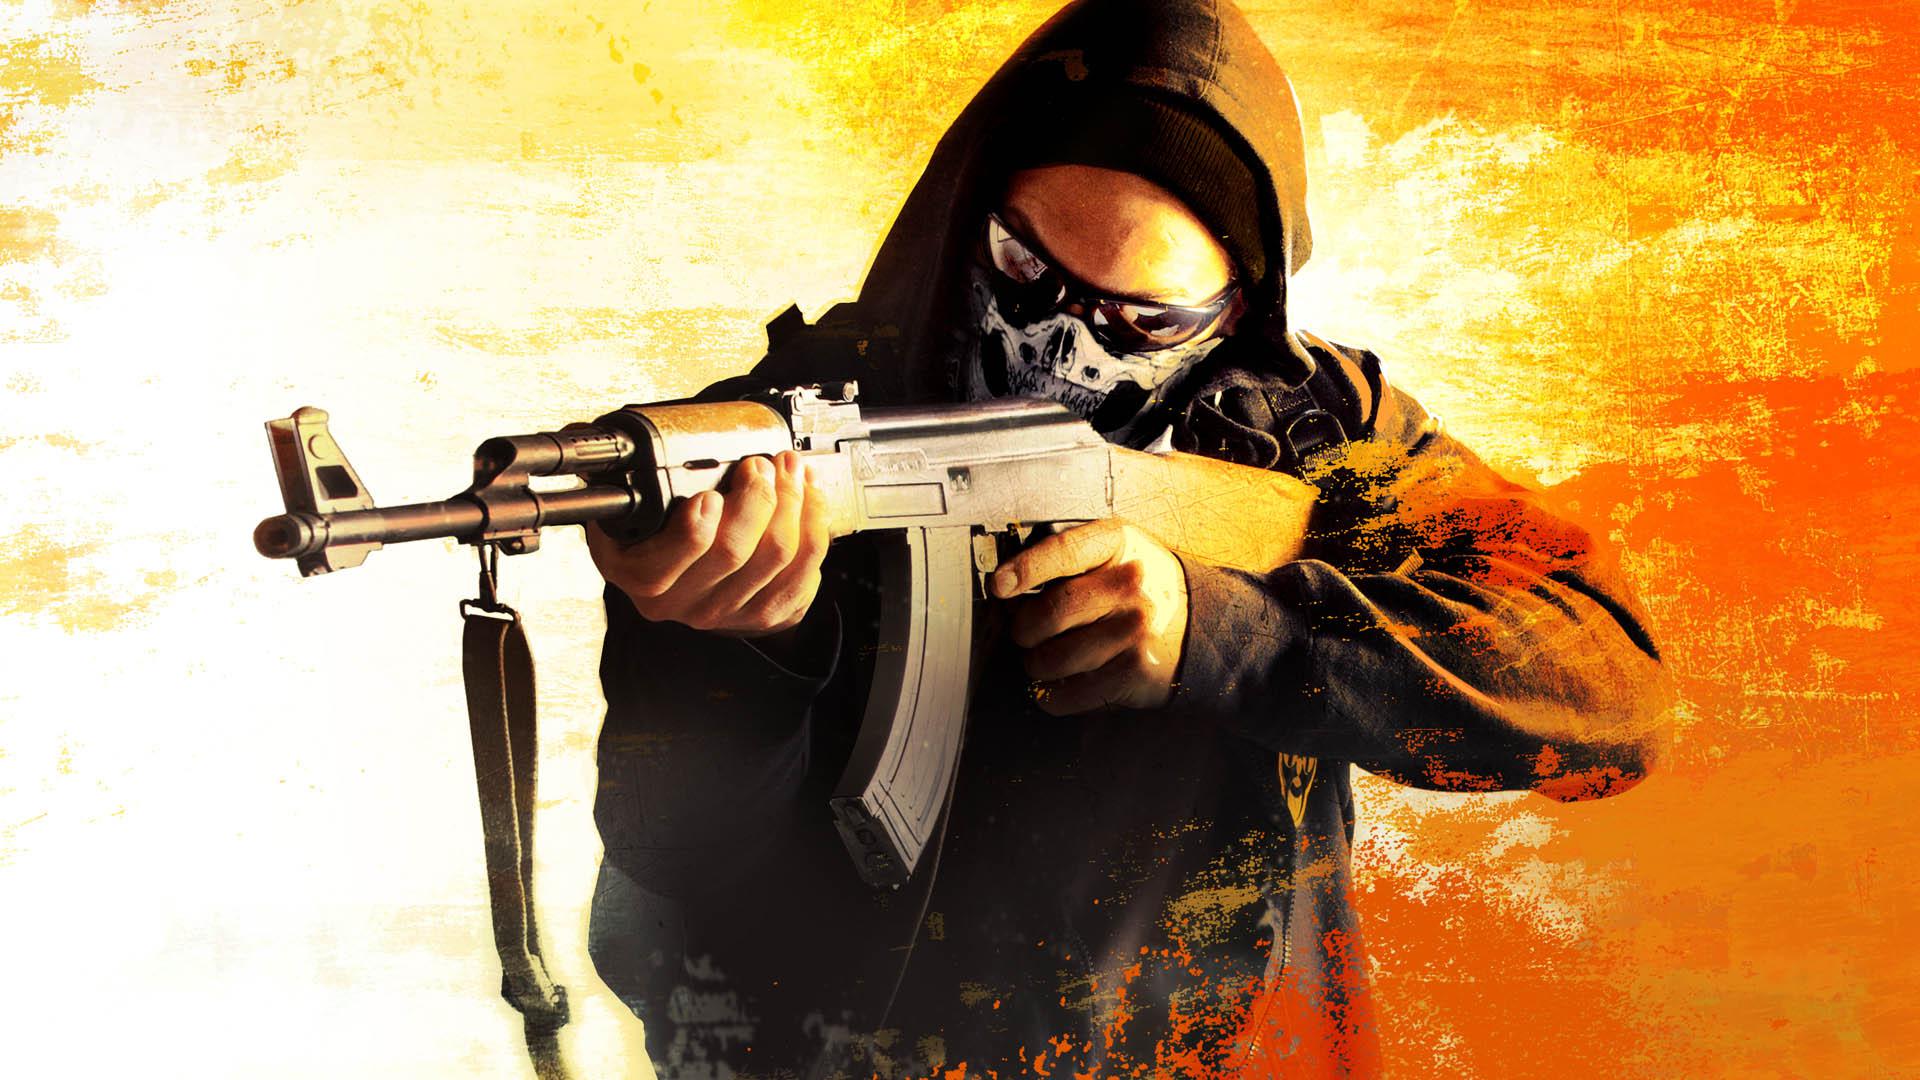 1336x768 Counter Strike Global Offensive Laptop HD HD 4k Wallpapers,  Images, Backgrounds, Photos and Pictures